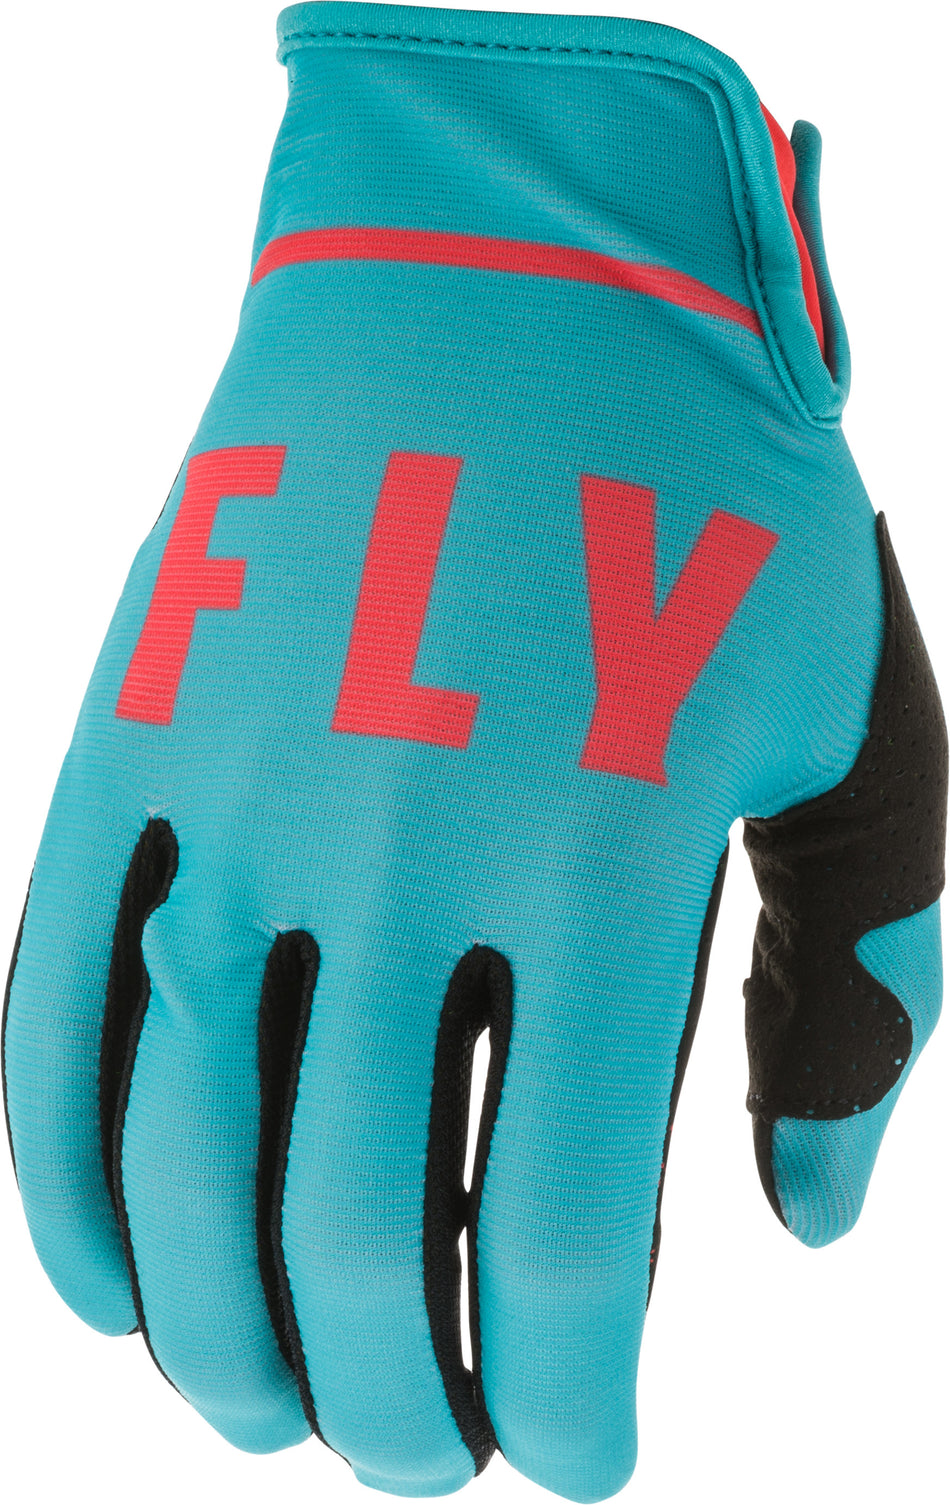 FLY RACING Lite Gloves Blue/Coral Sz 08 373-71908